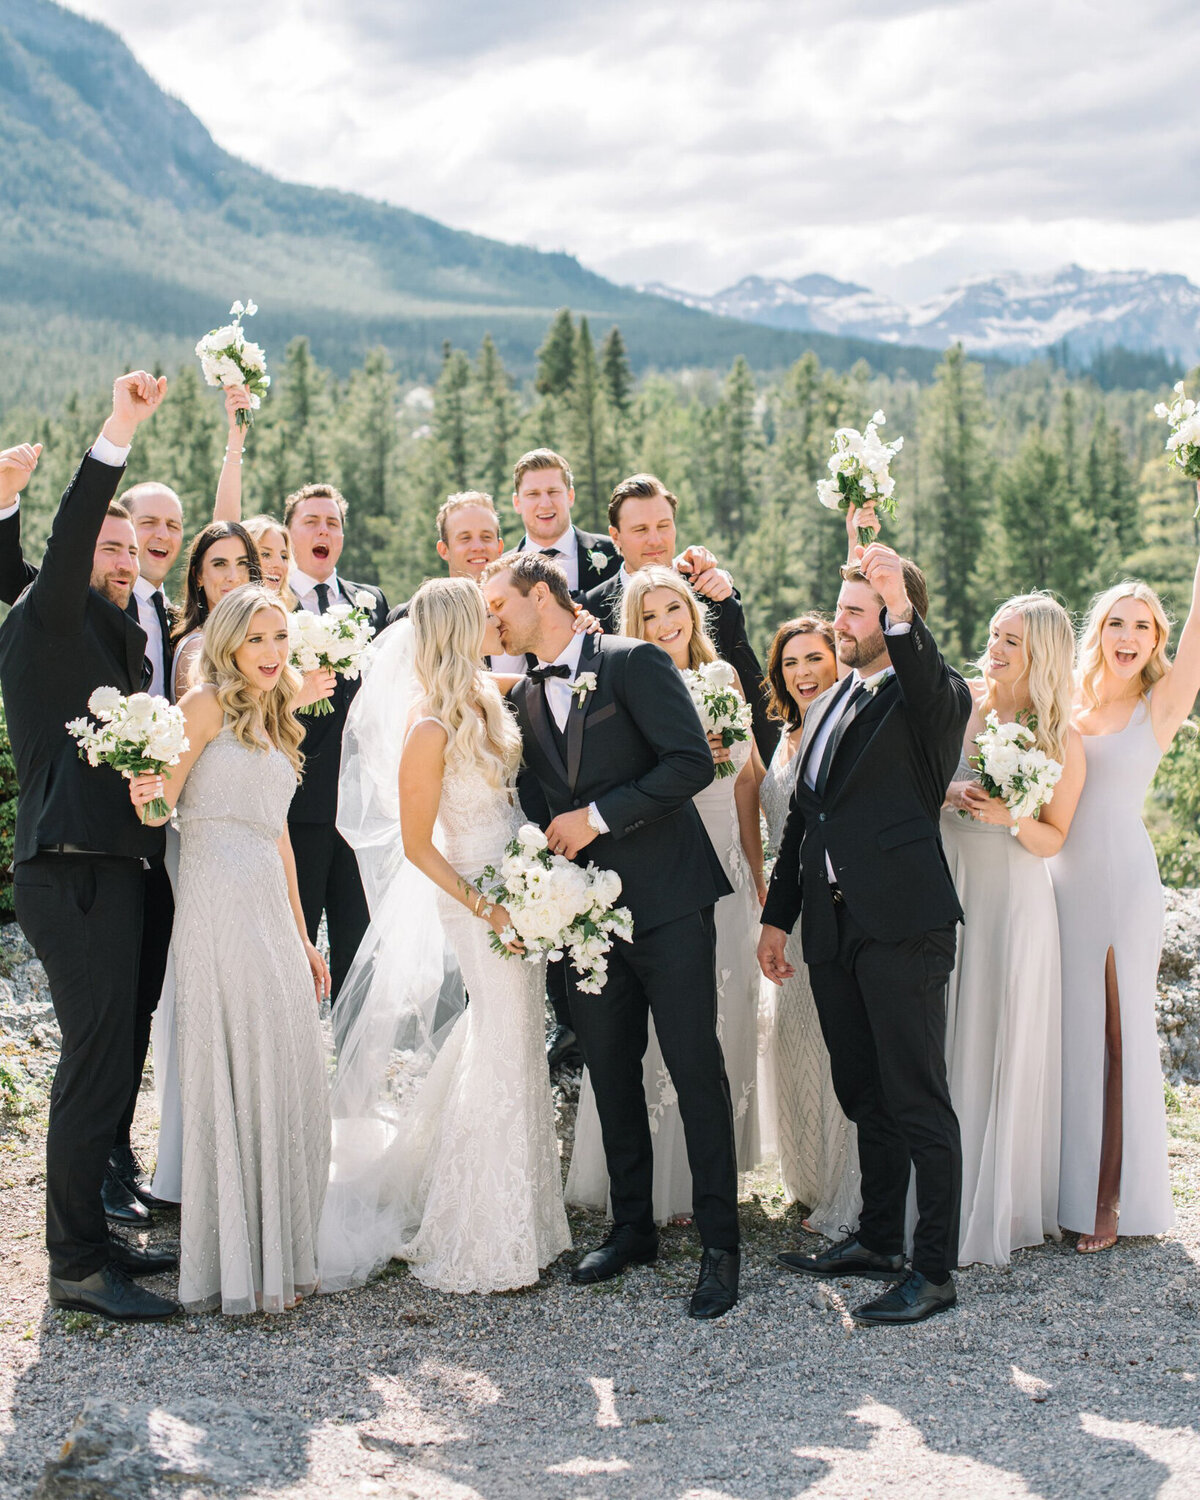 Wedding party captured by Corrina Walker Photography, timeless and elegant wedding photographer in Calgary, Alberta. Featured on the Bronte Bride Vendor Guide.